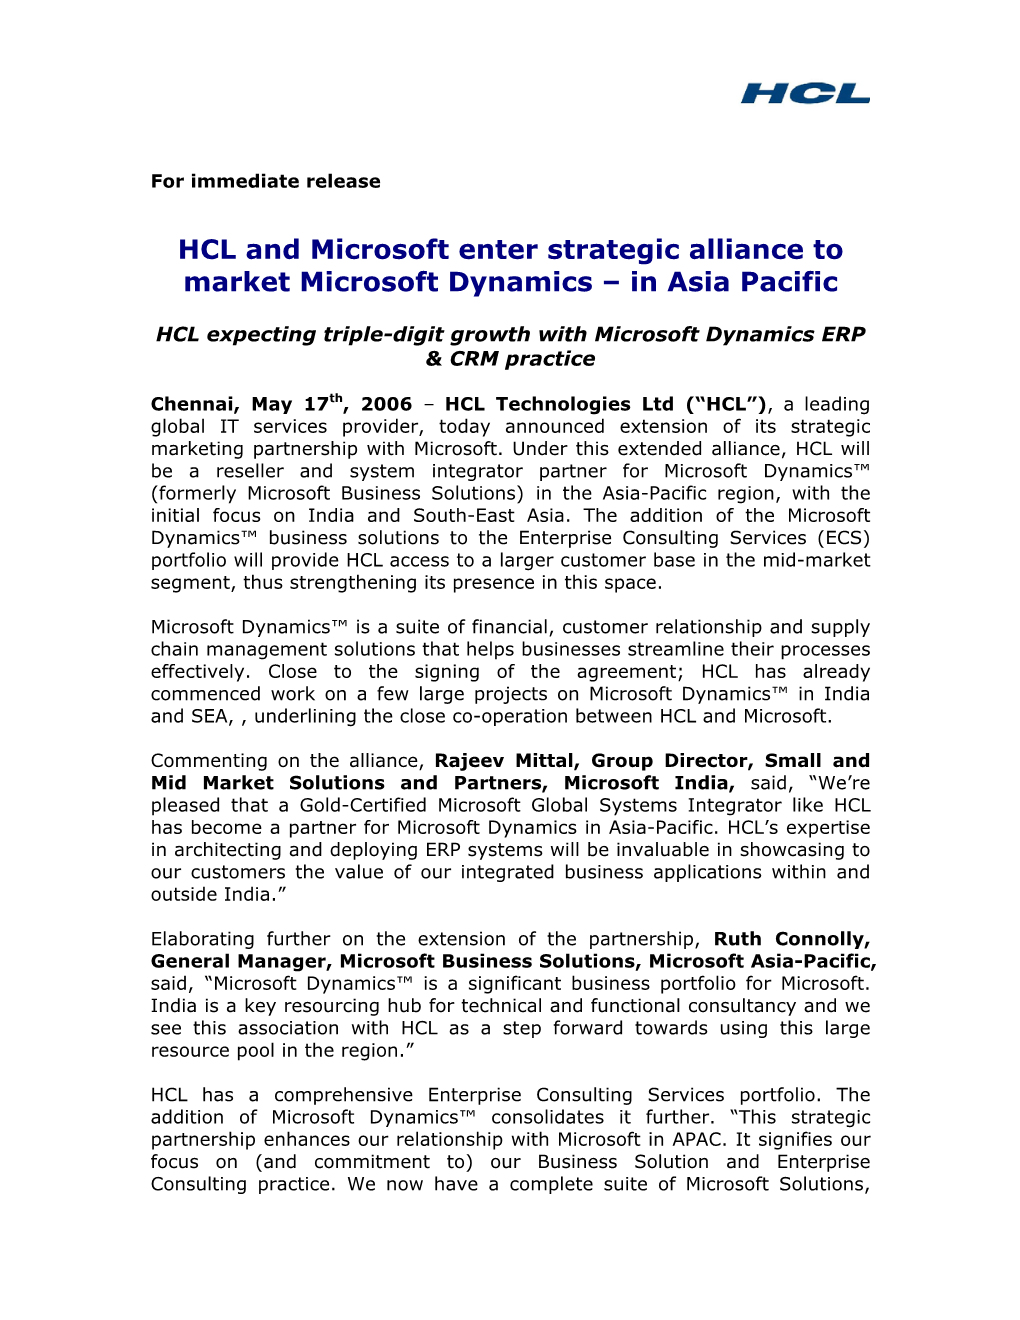 HCL Partners with Microsoft in APAC for Its Microsoft Dynamics Offerings